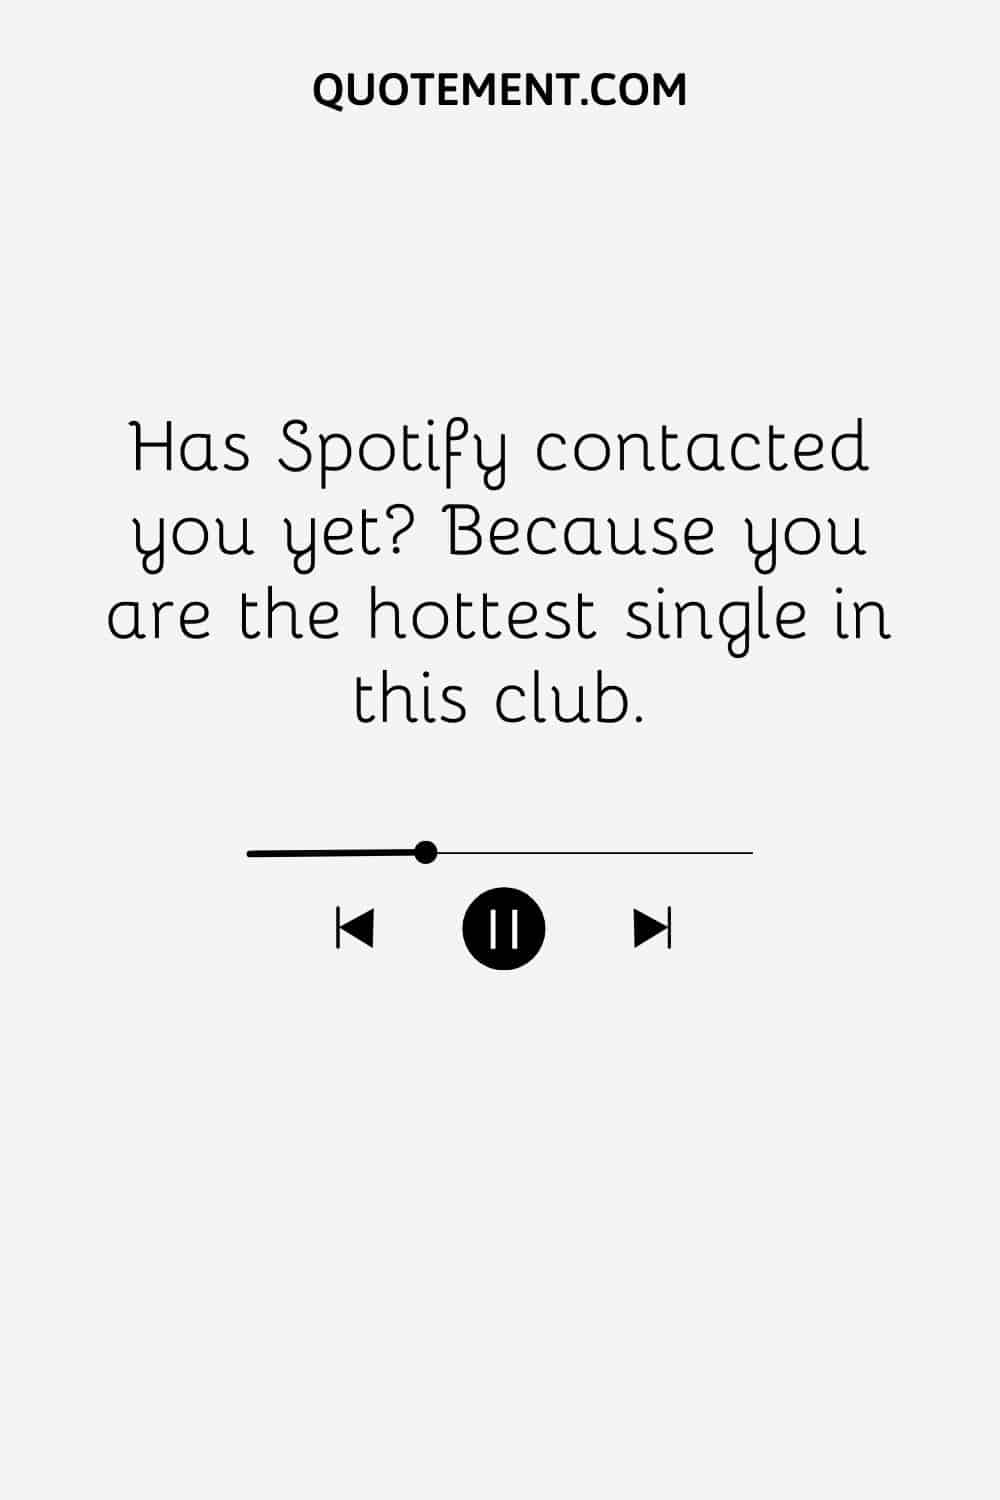 Has Spotify contacted you yet Because you are the hottest single in this club